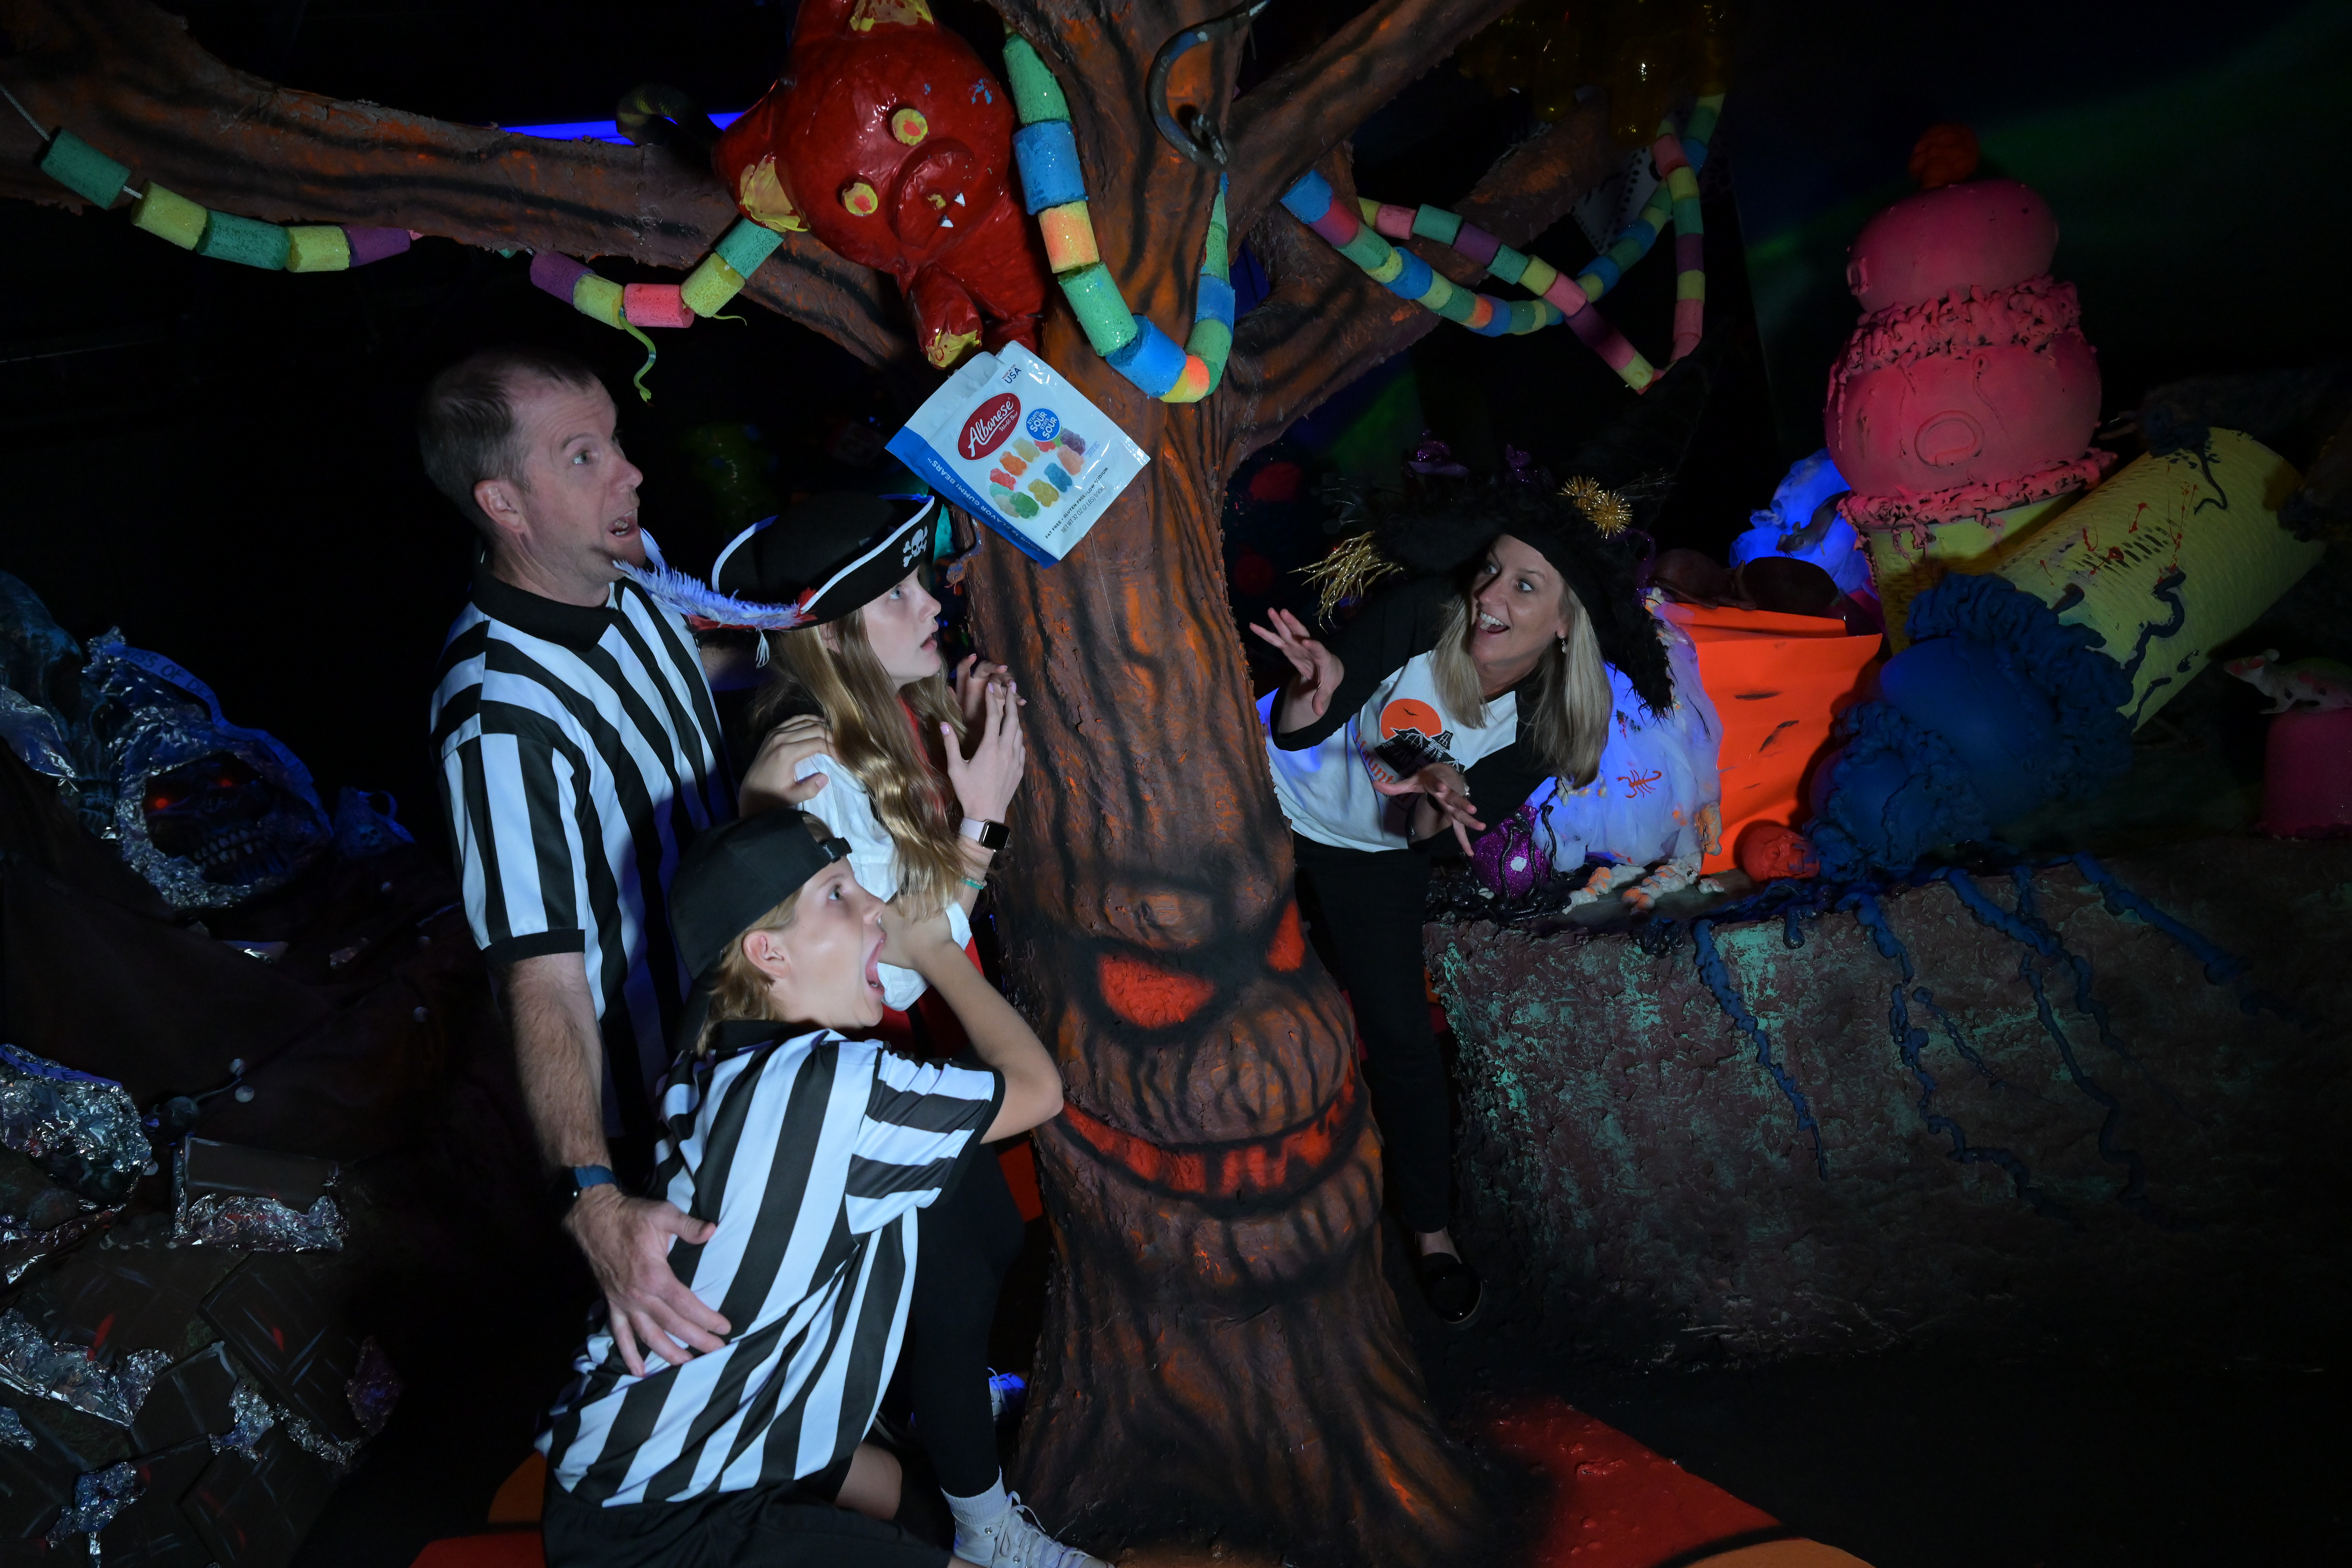 A woman scaring a family at a Halloween haunted house